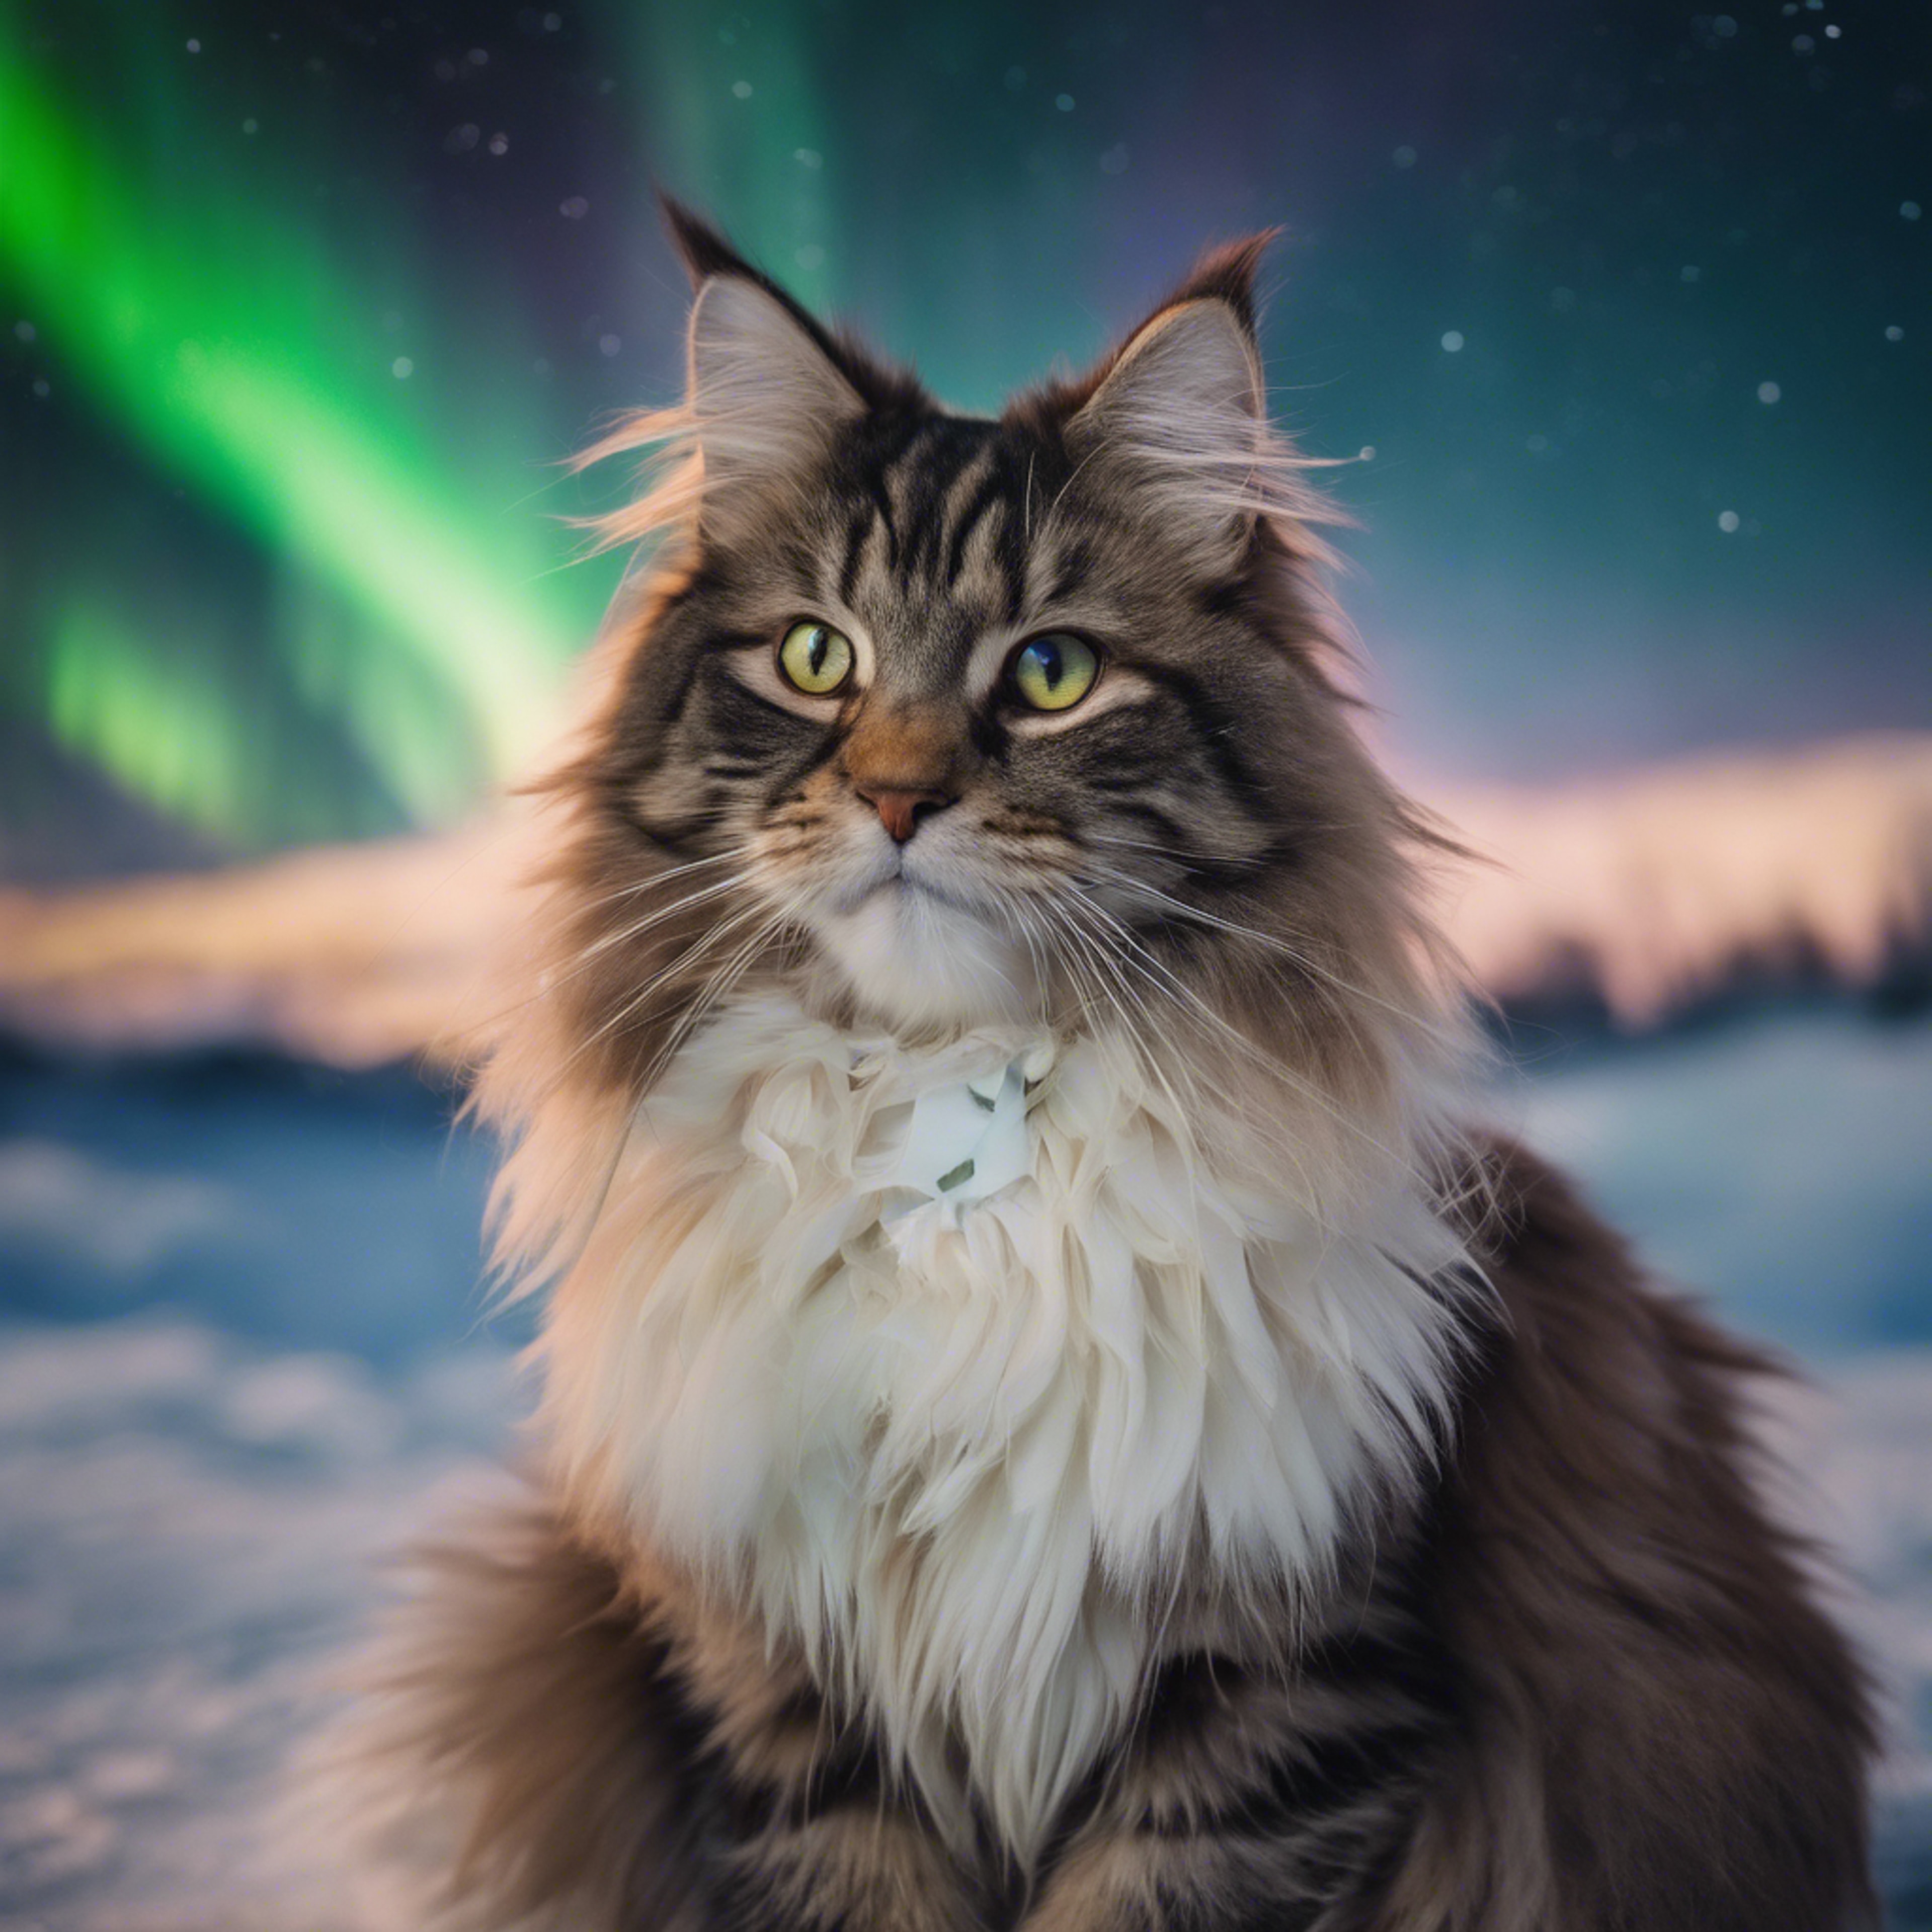 A Norwegian Forest cat sitting quietly under the aurora borealis, its eyes reflecting the dancing lights. Hình nền[1b2a9174317e40c9a8f4]